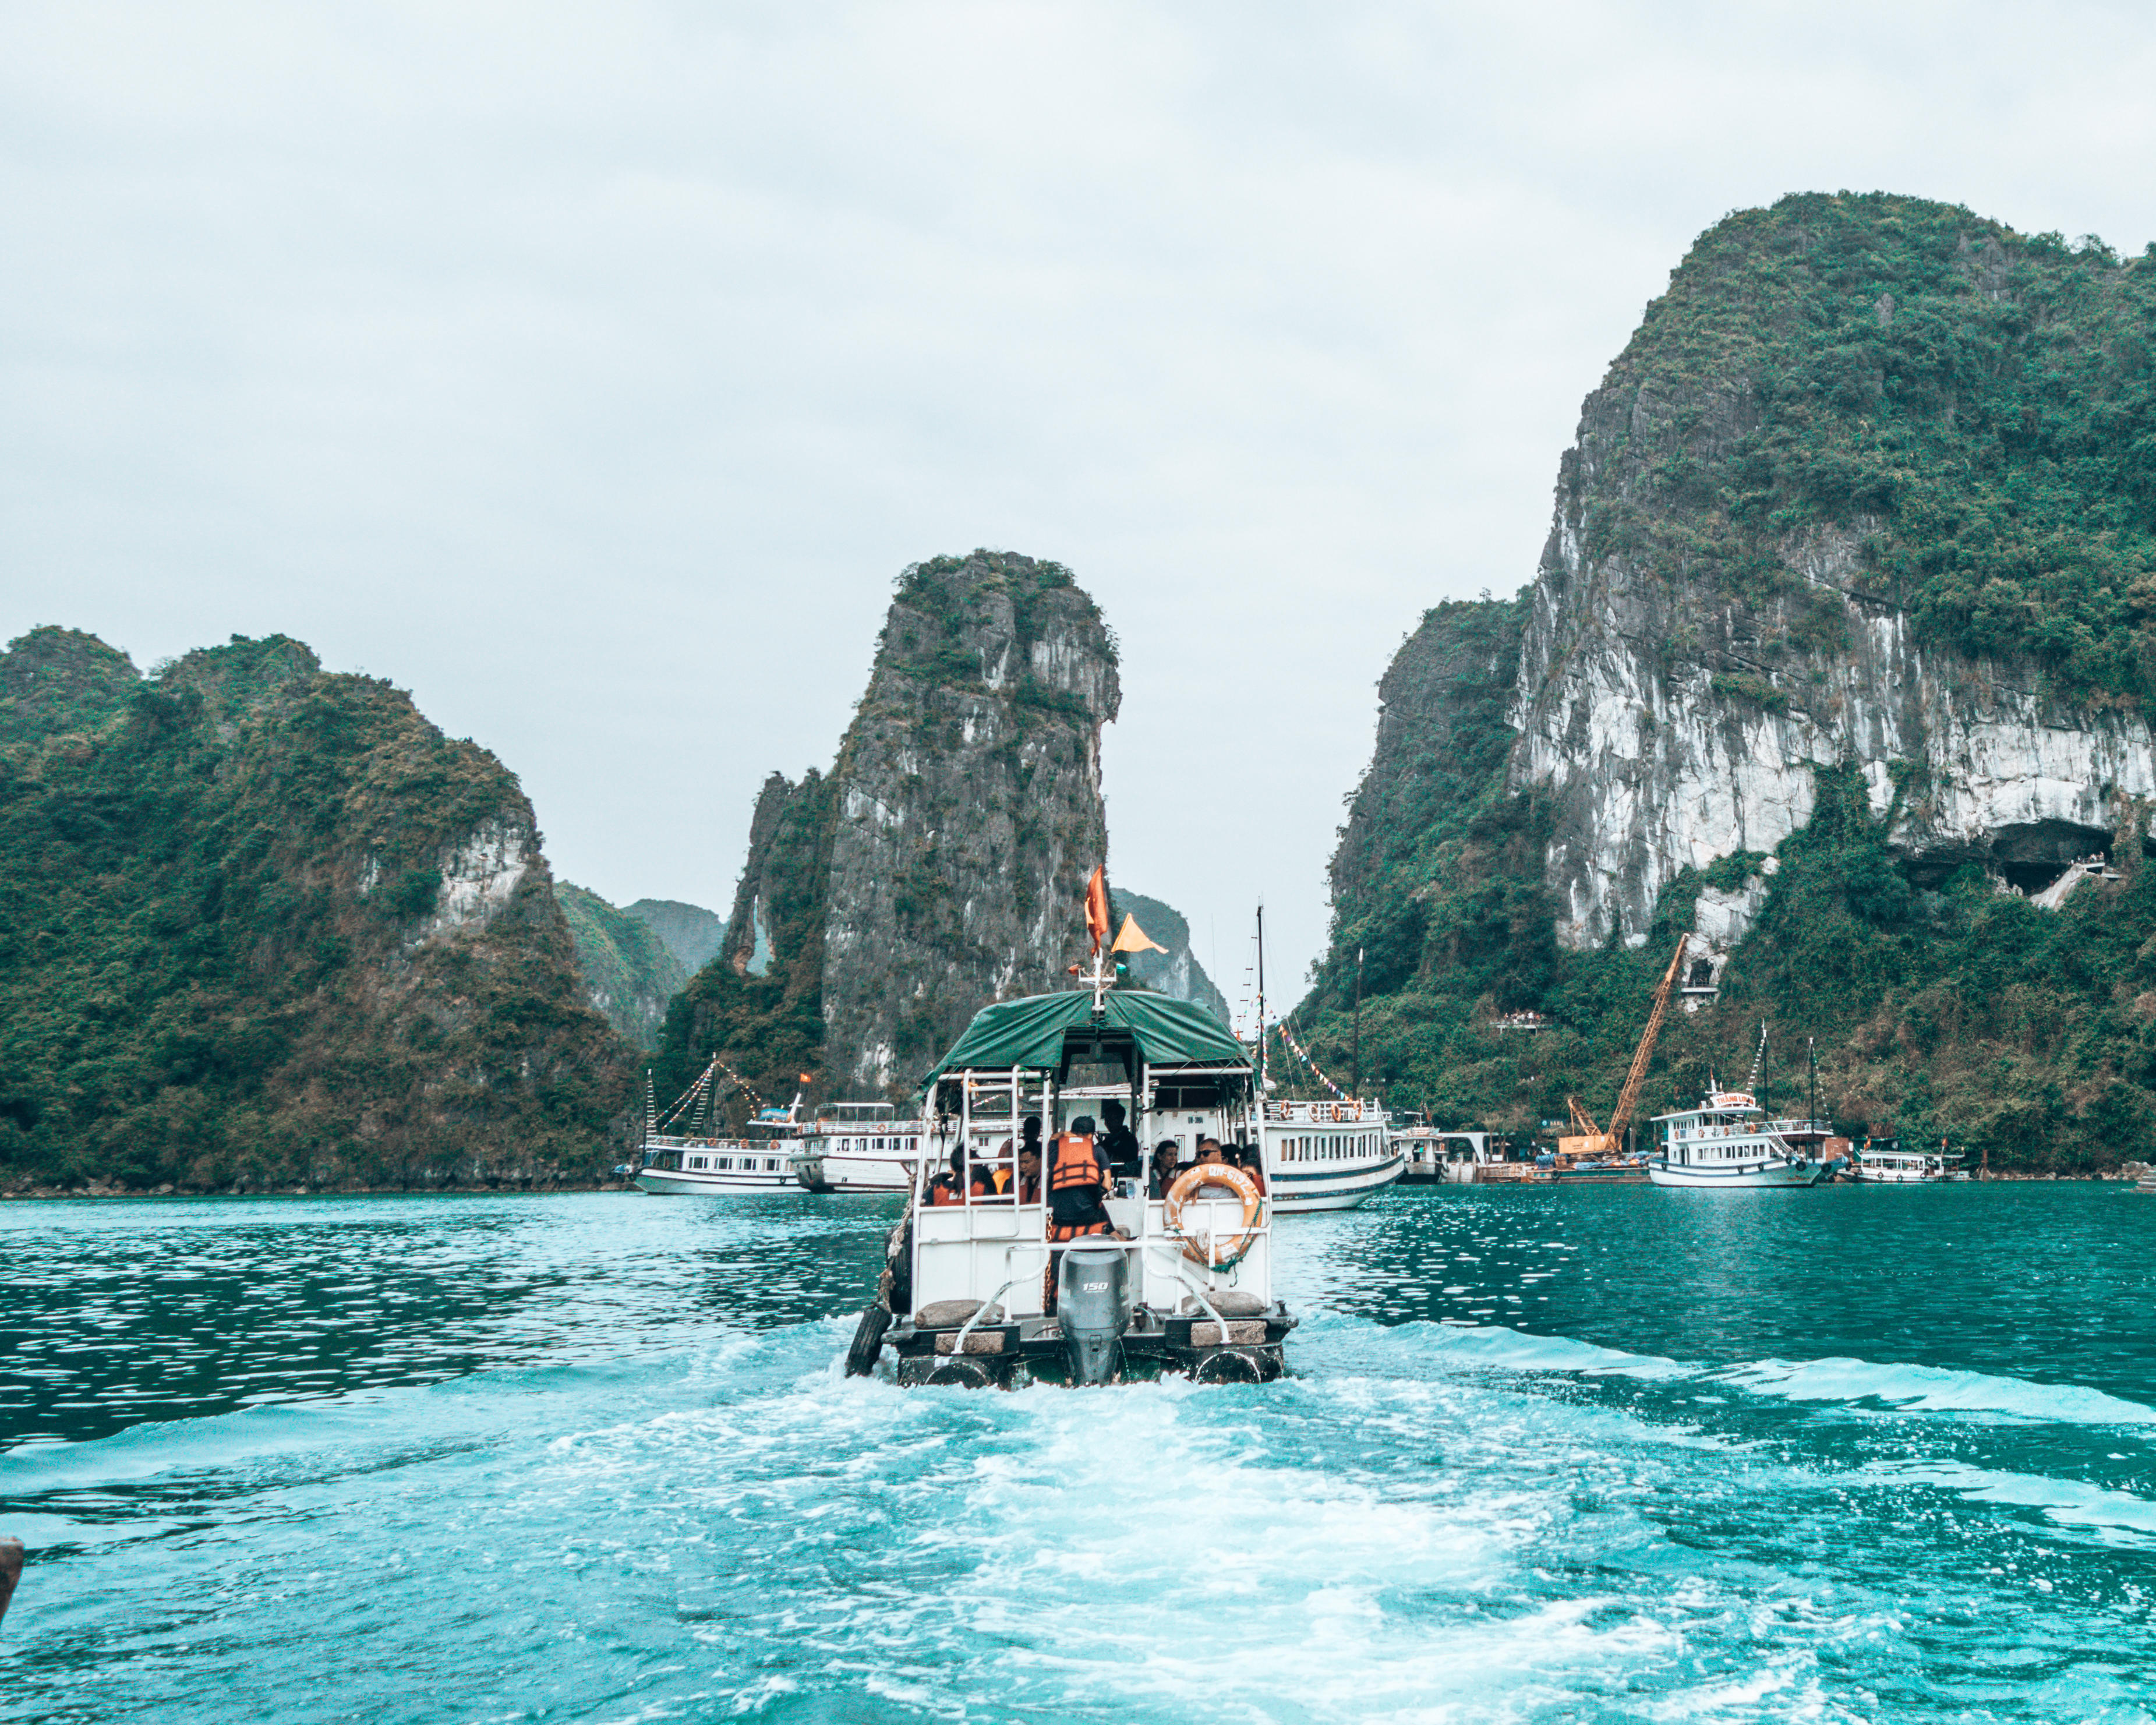 Sailing through Halong Bay Vietnam with many other boats